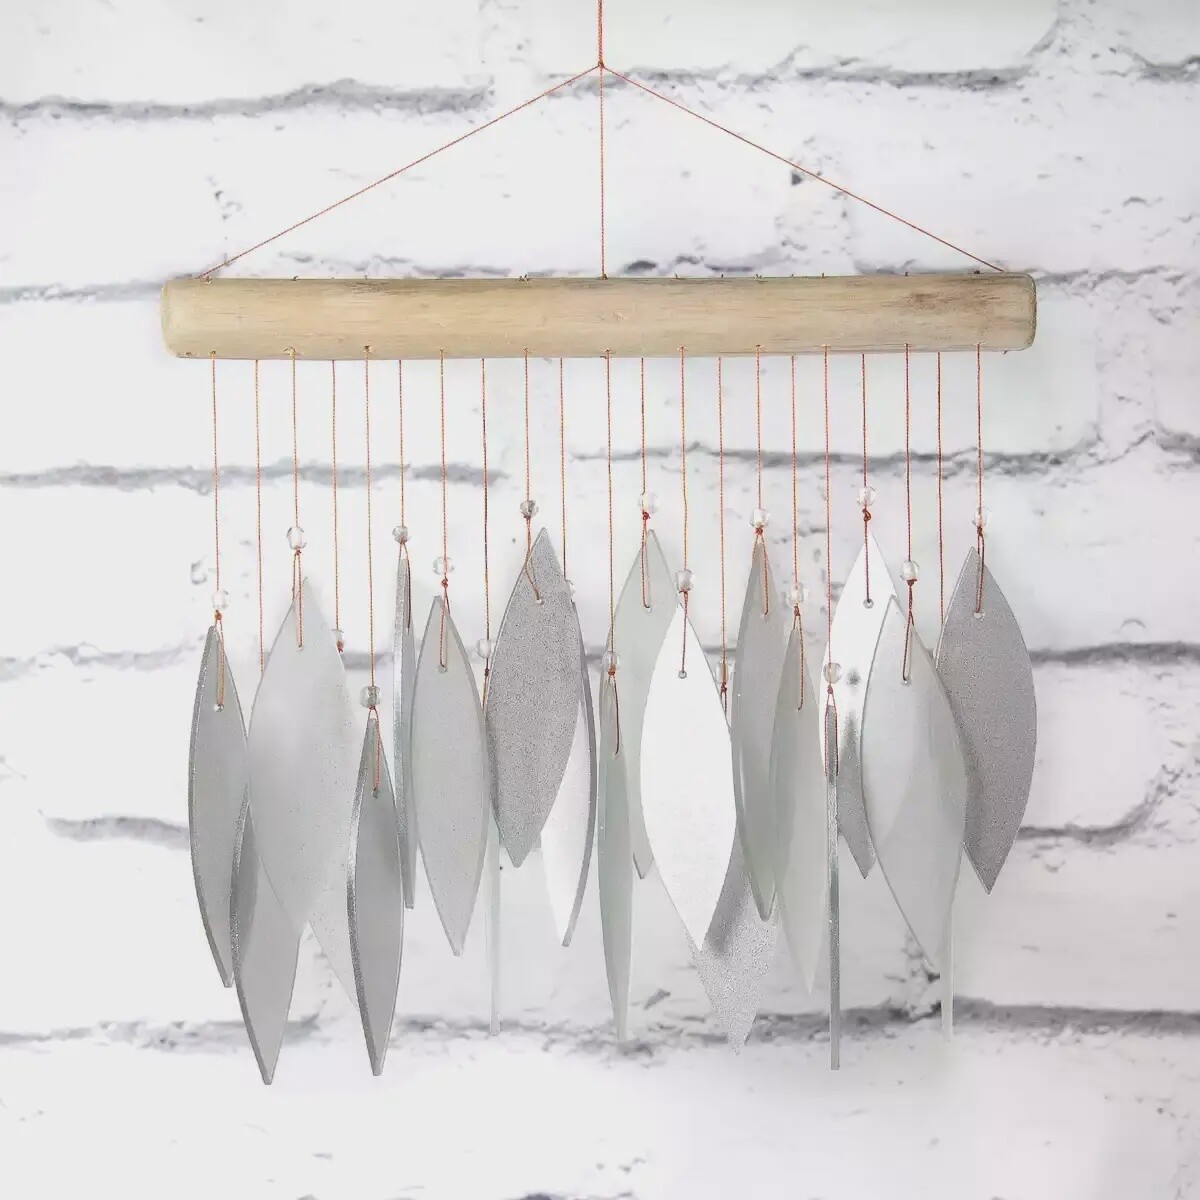 Glass Wind Chime - Leaves - Sparkling Silver by Sunlover